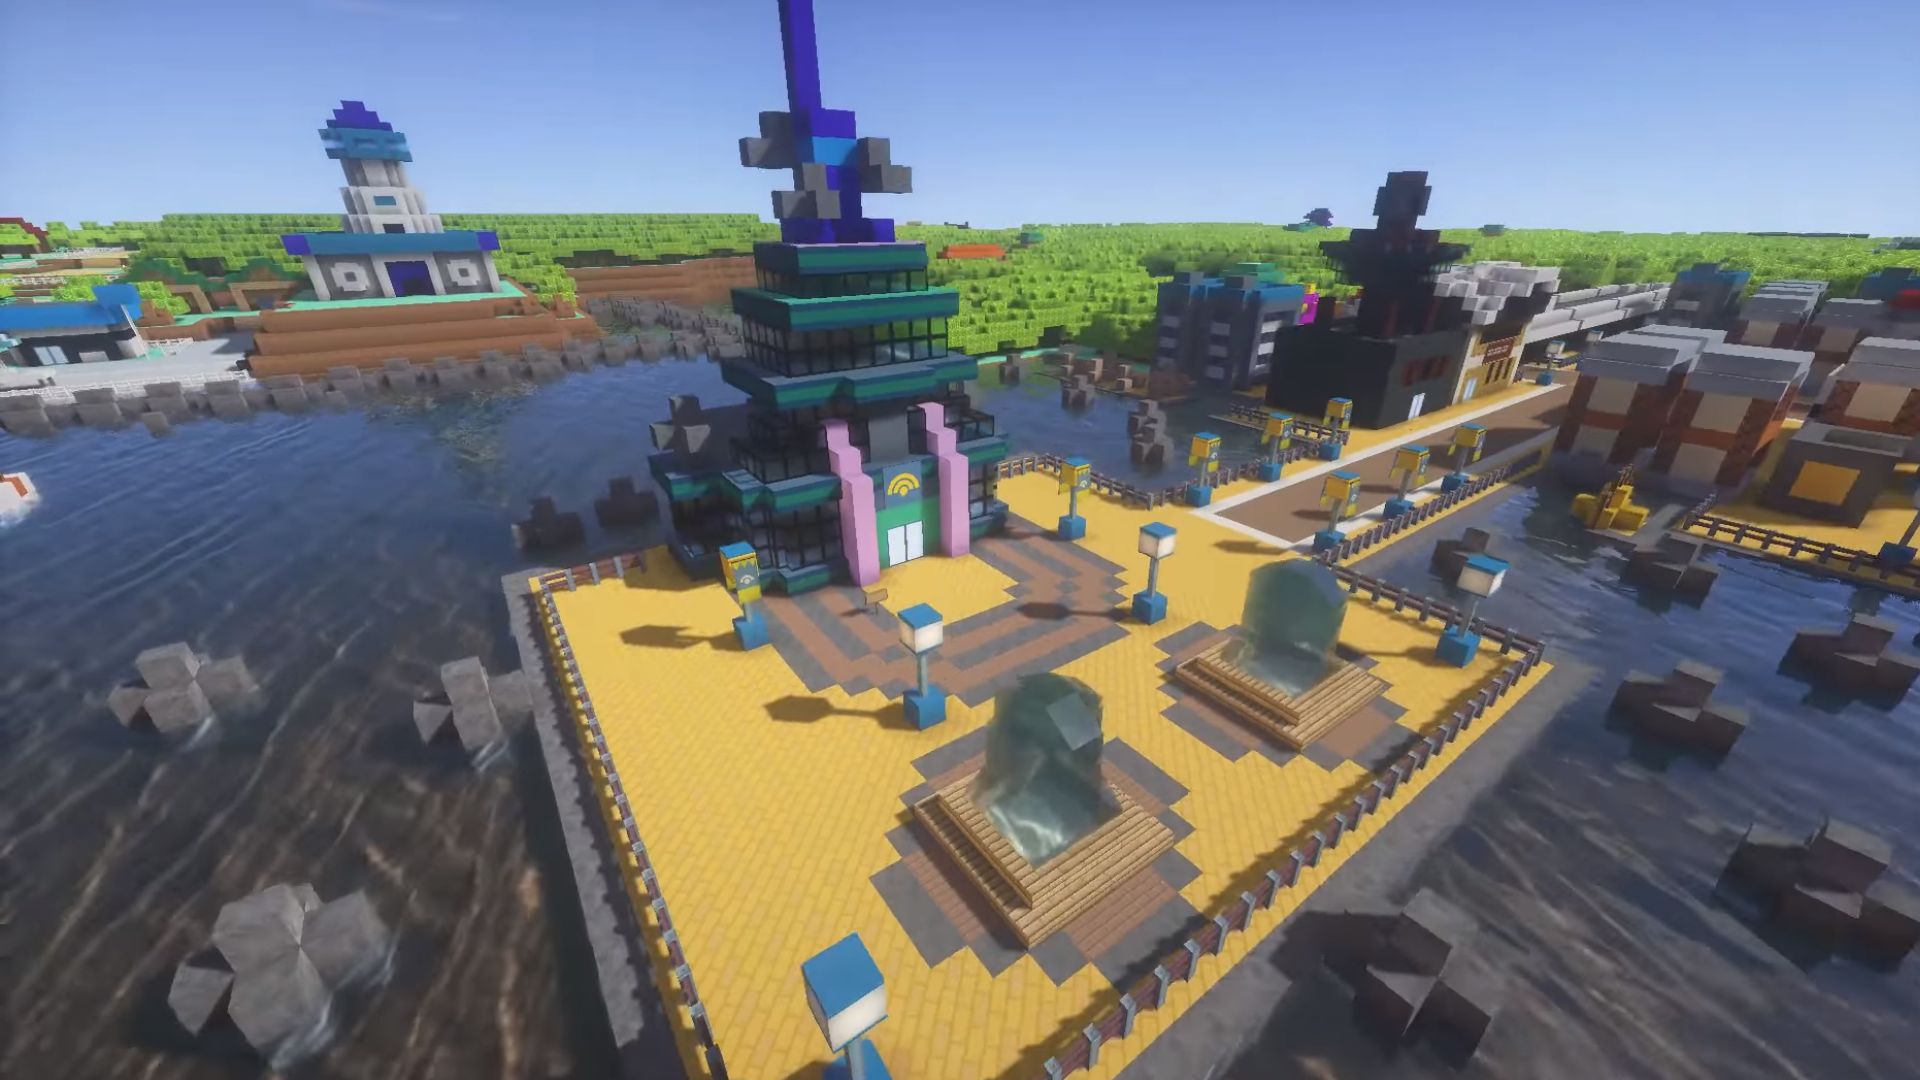 build a structure from google maps or via image in minecraft